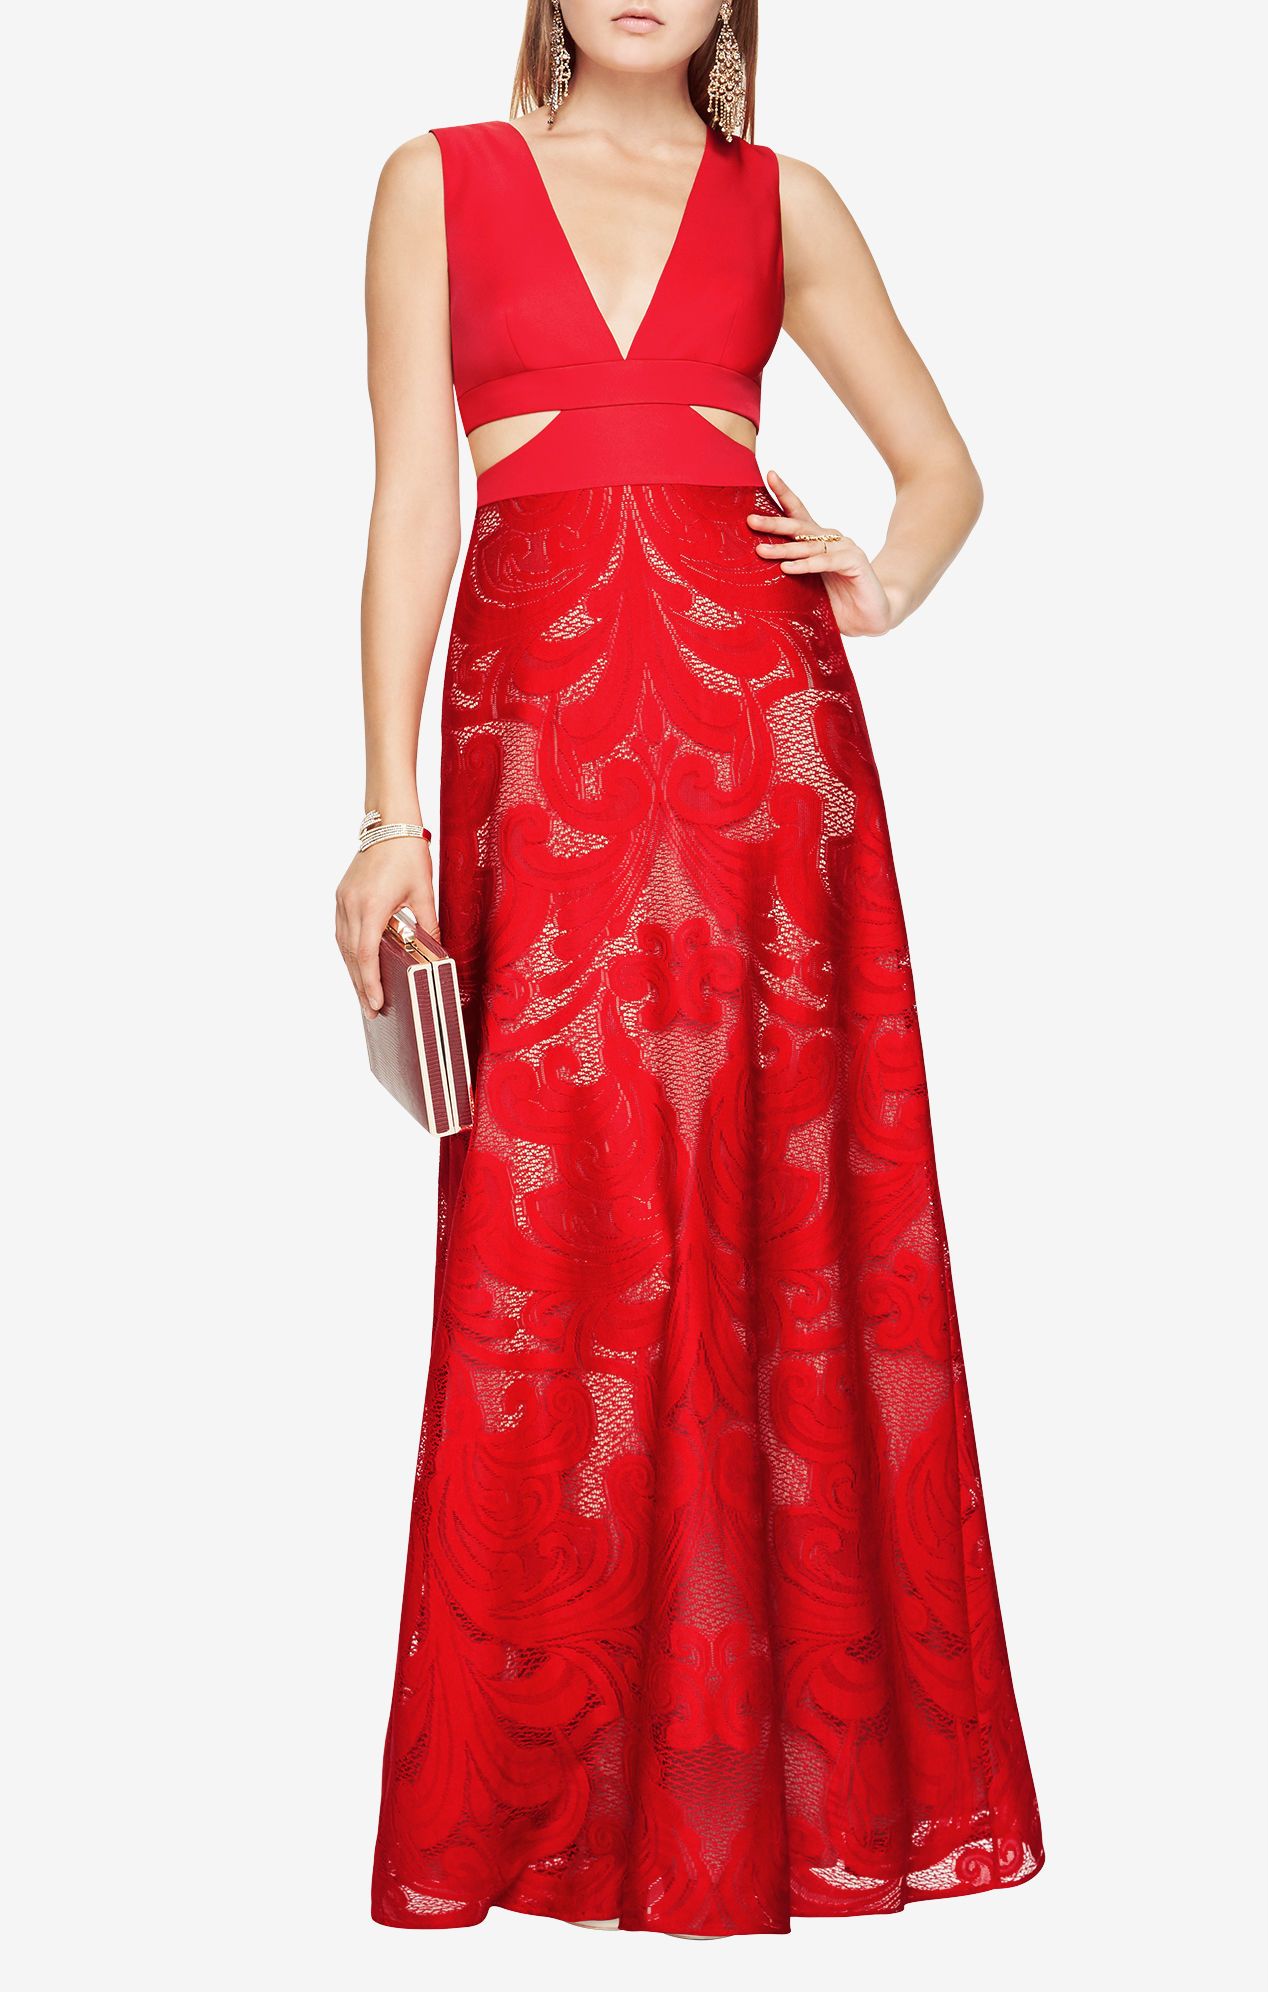 Marilyne Cutout Lace Gown | Cocktail dress lace, Red lace gown, Bcbg